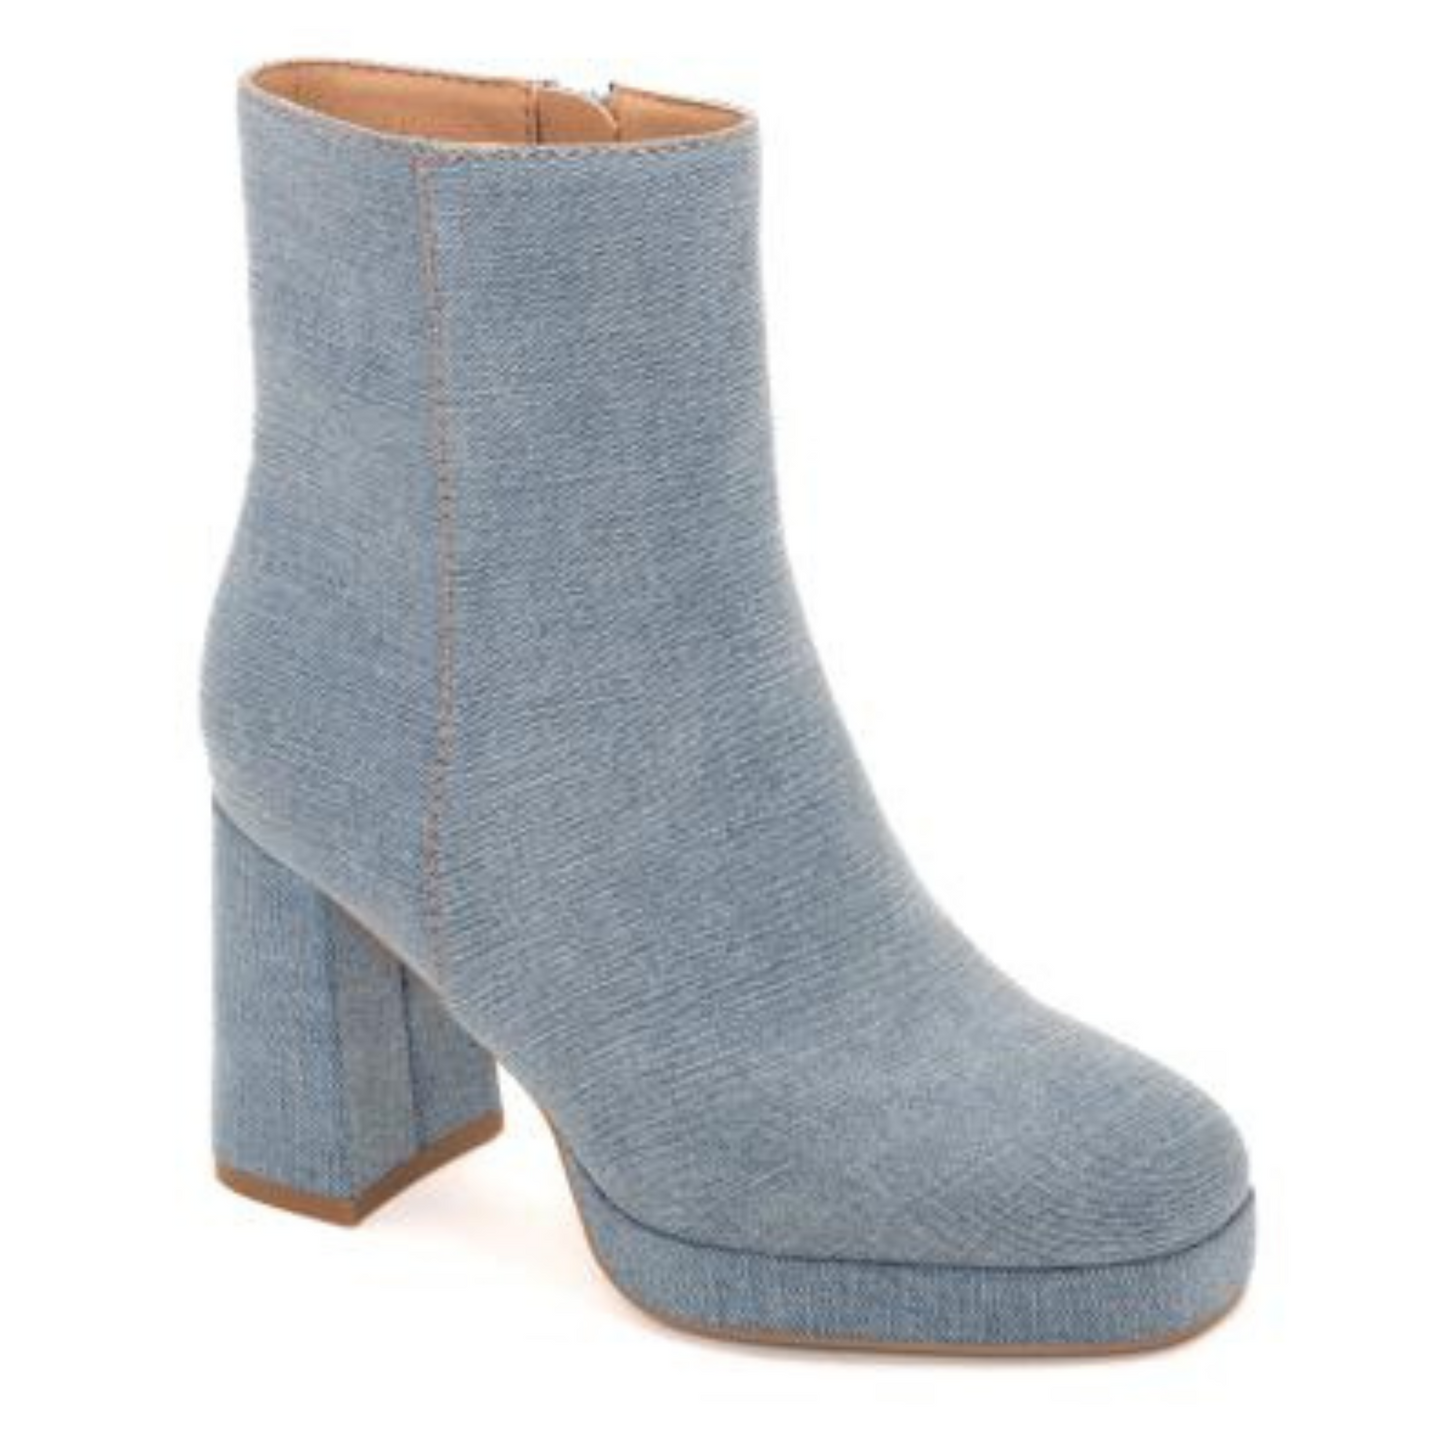 Corky's Slug Bug booties feature a denim color and a high heel, making them an ideal pick for autumn. These comfortable and stylish booties are sure to elevate your look.